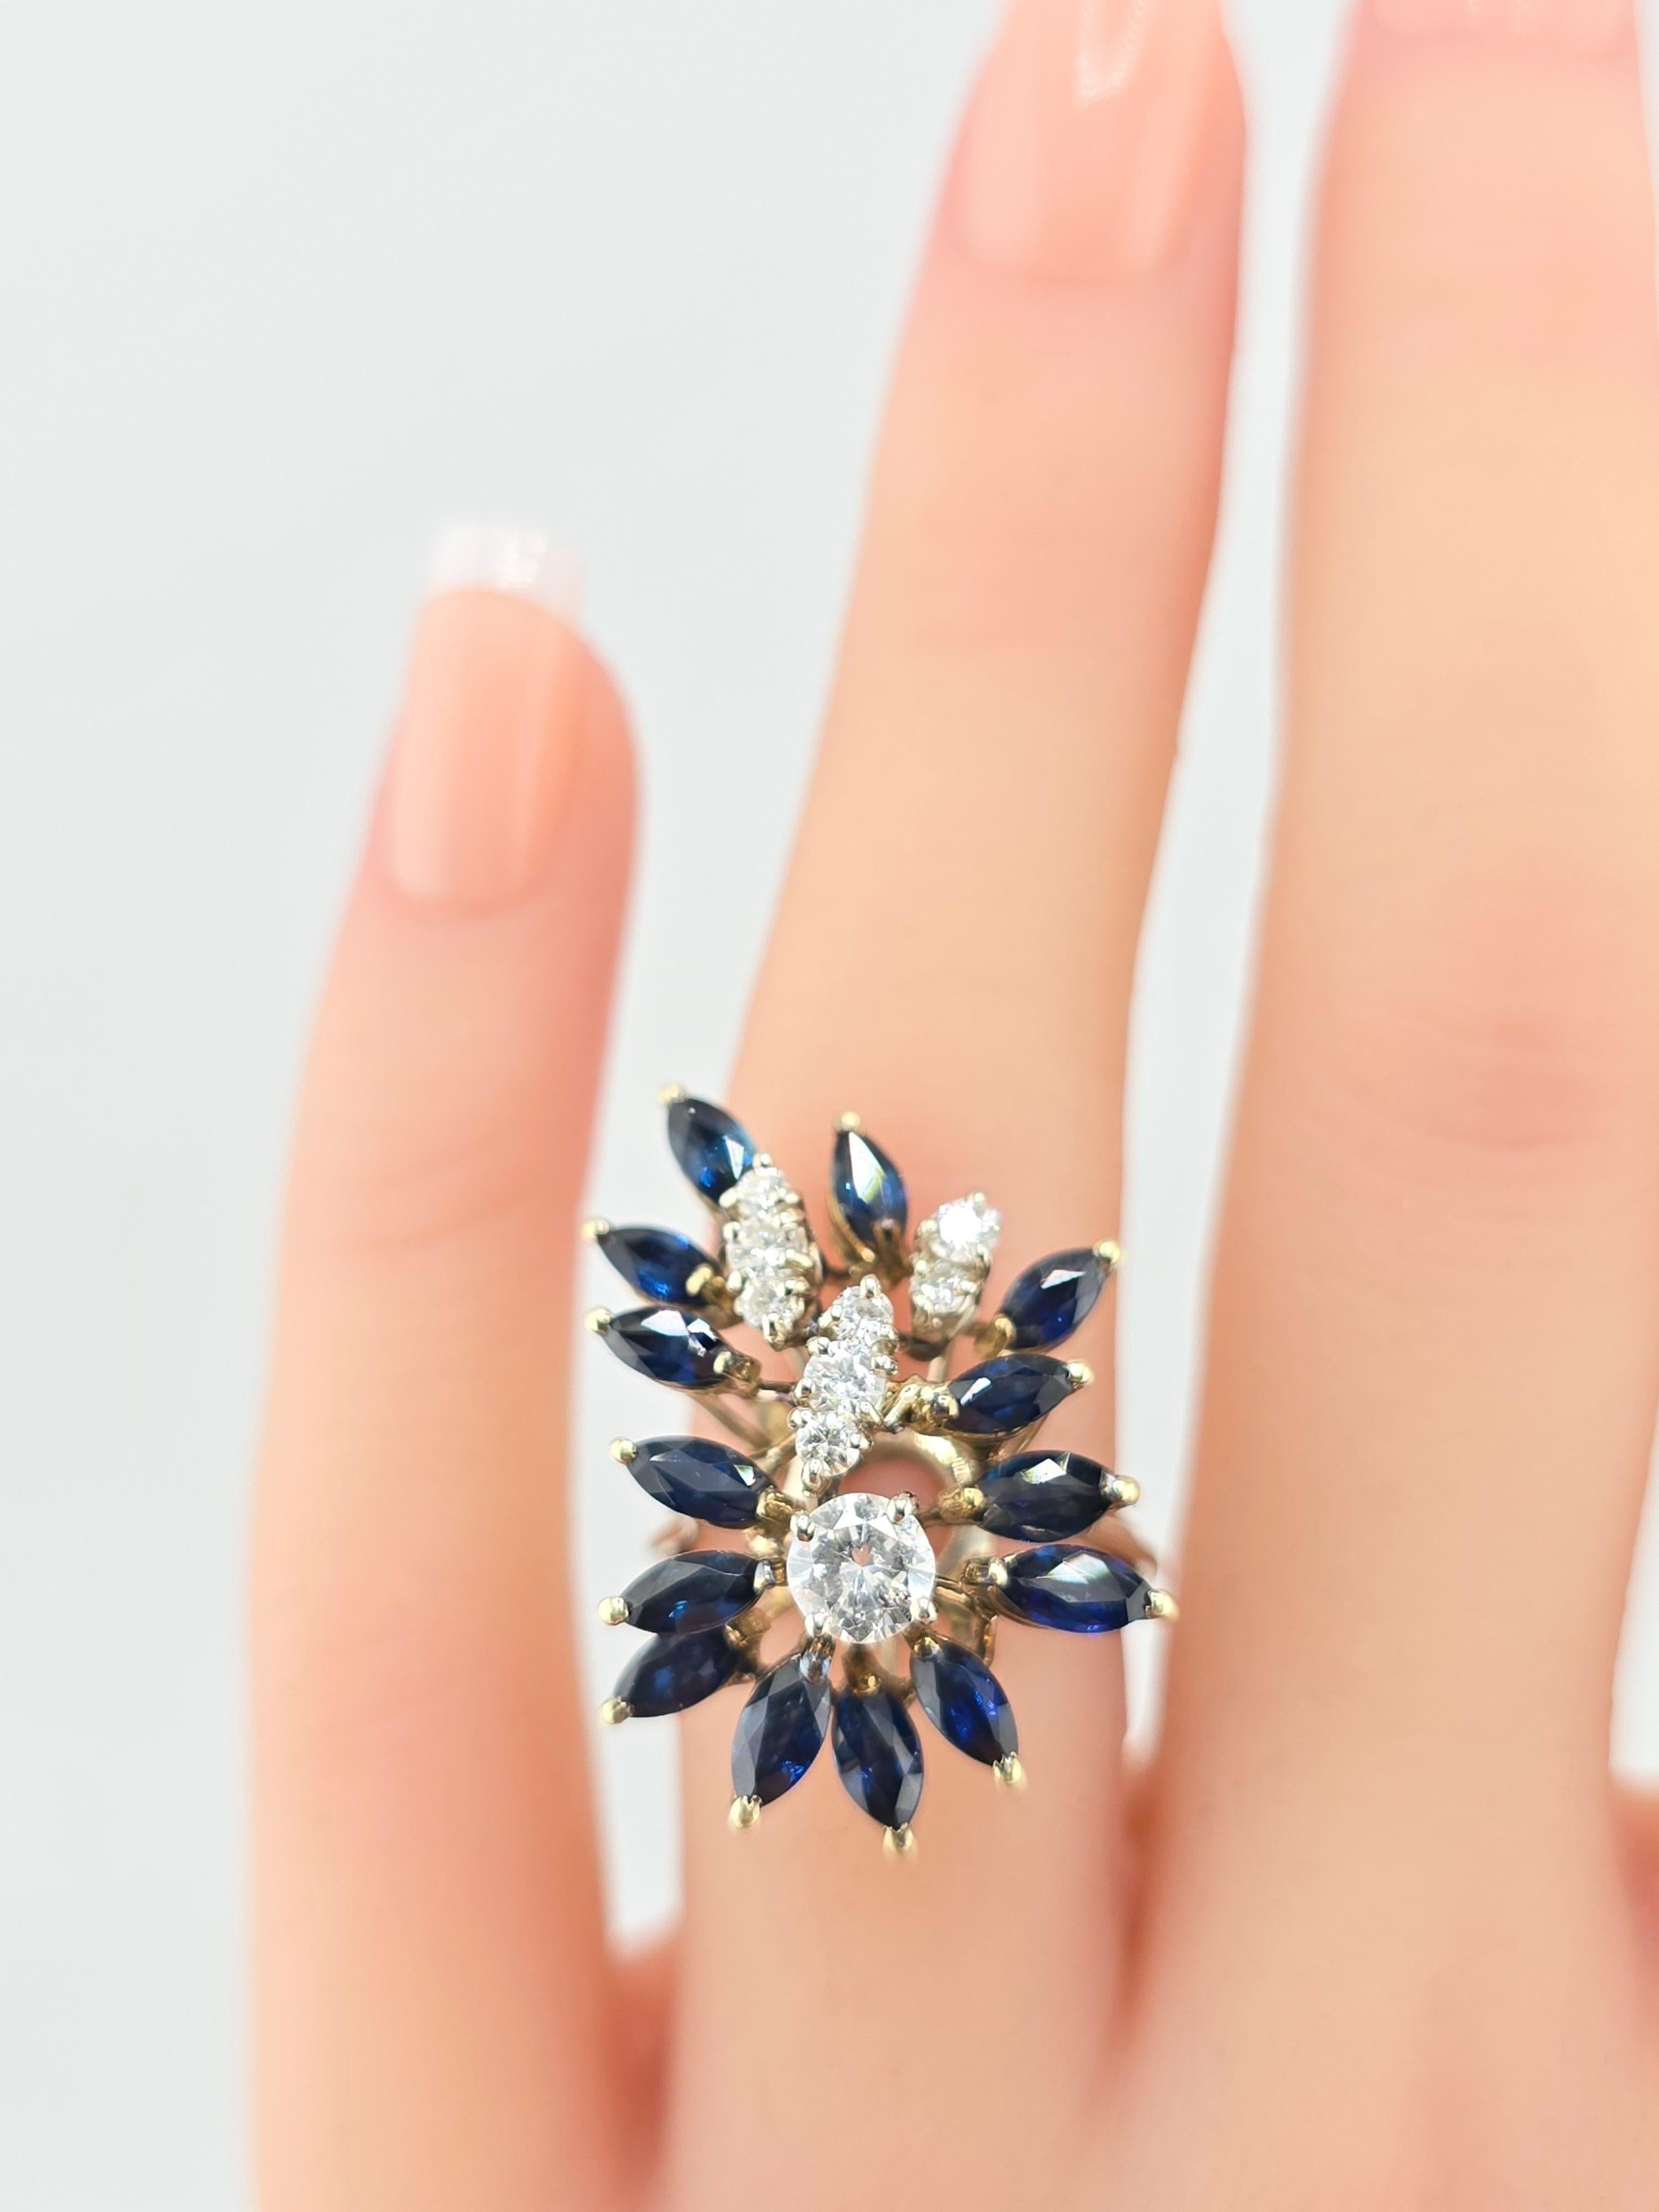 Marvelous Diamond & Sapphire Cluster Ring Gorgeous Stones In Good Condition For Sale In Media, PA